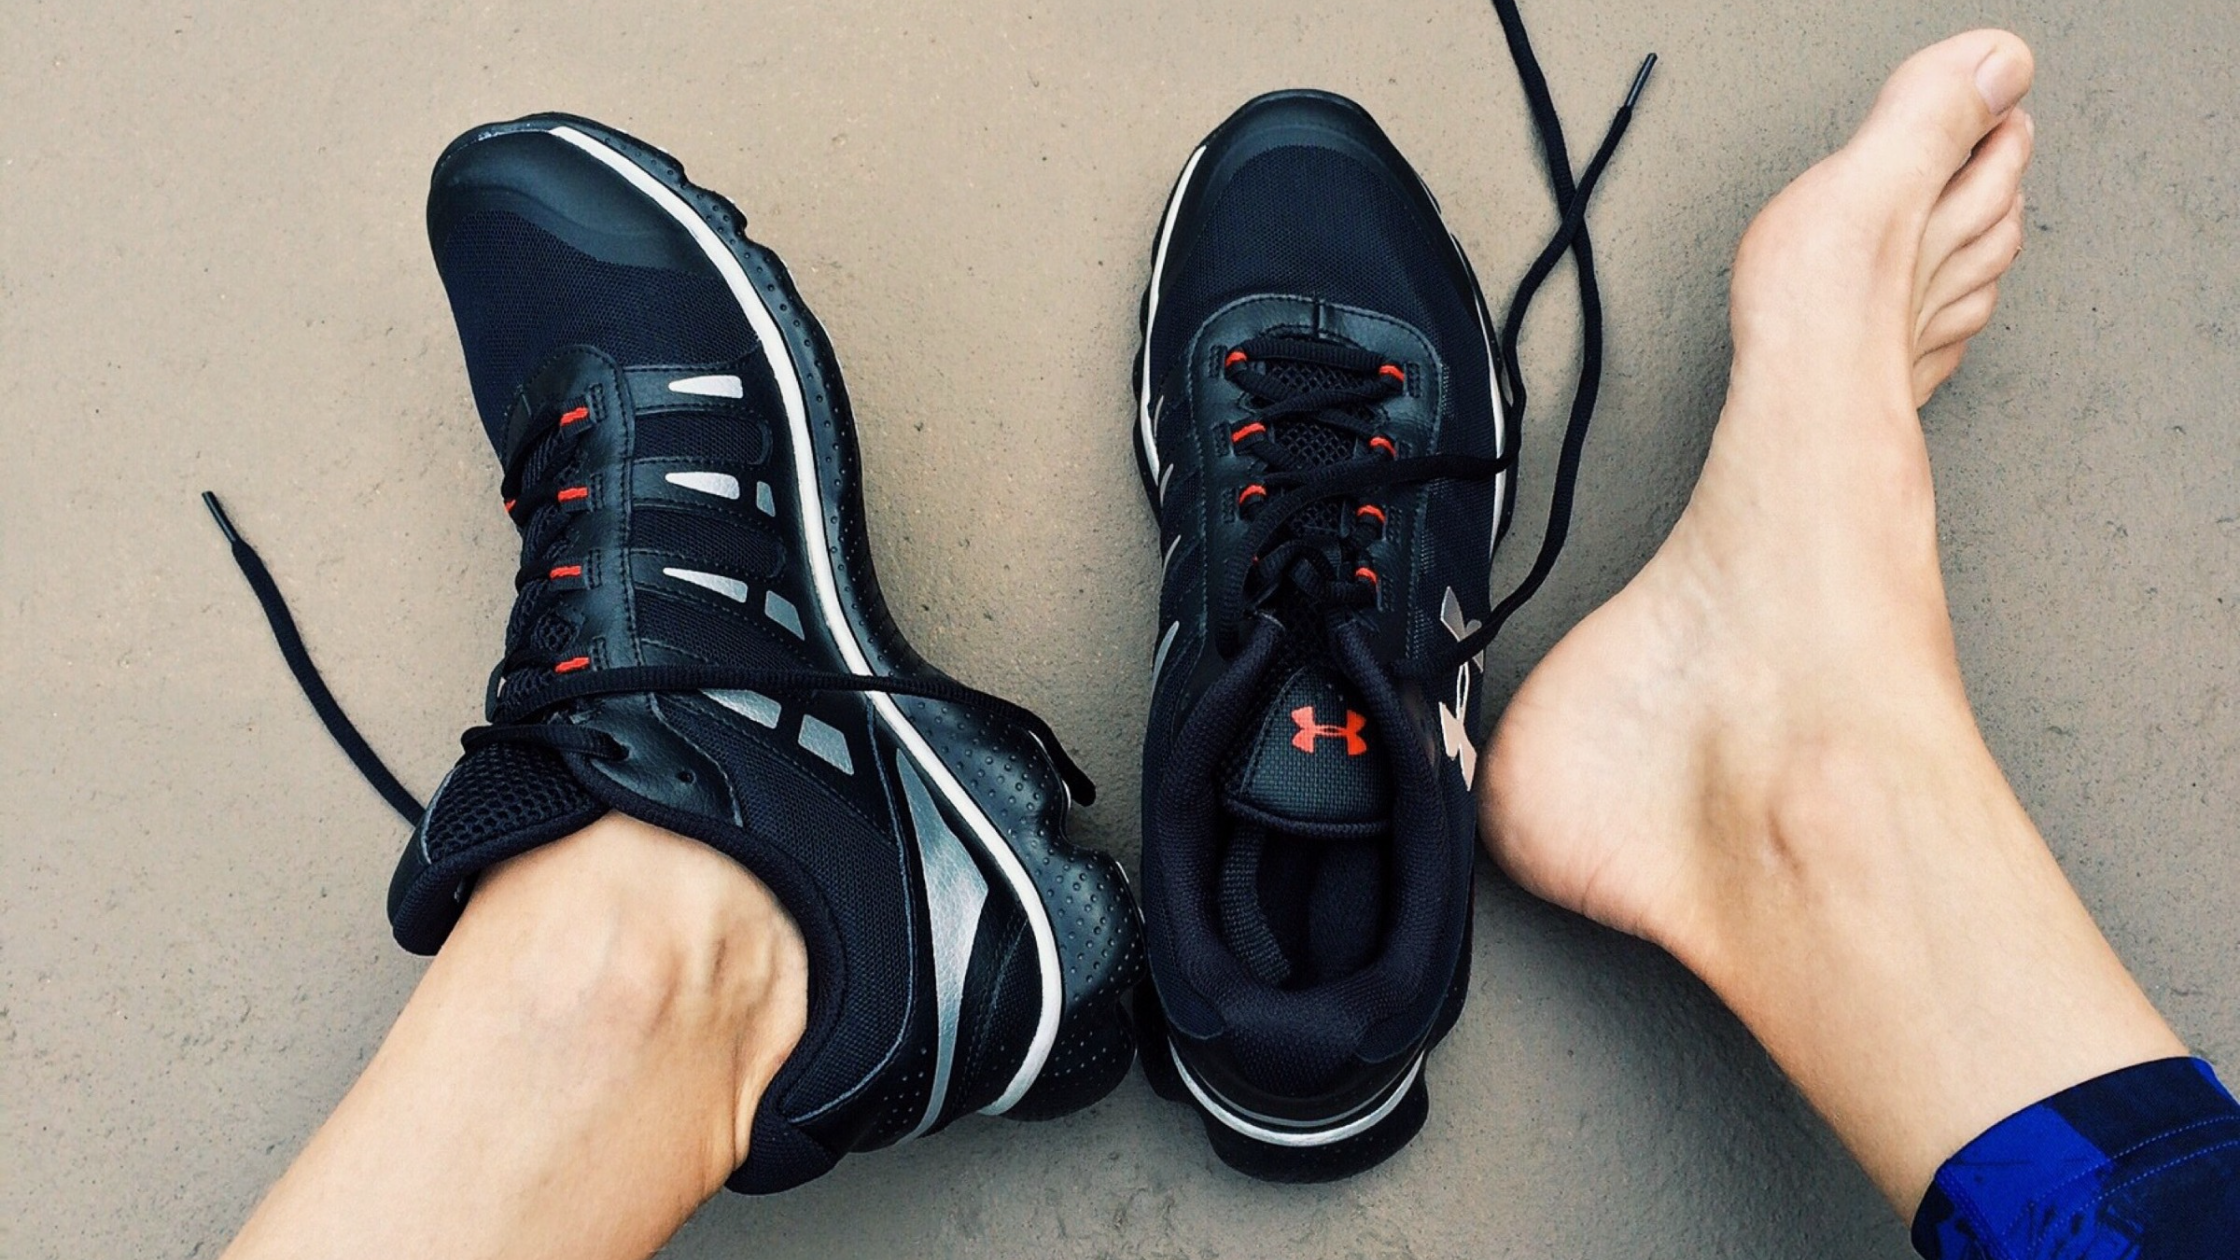 Why Do My Feet Hurt While Running? Tips To Relieve Foot Pain